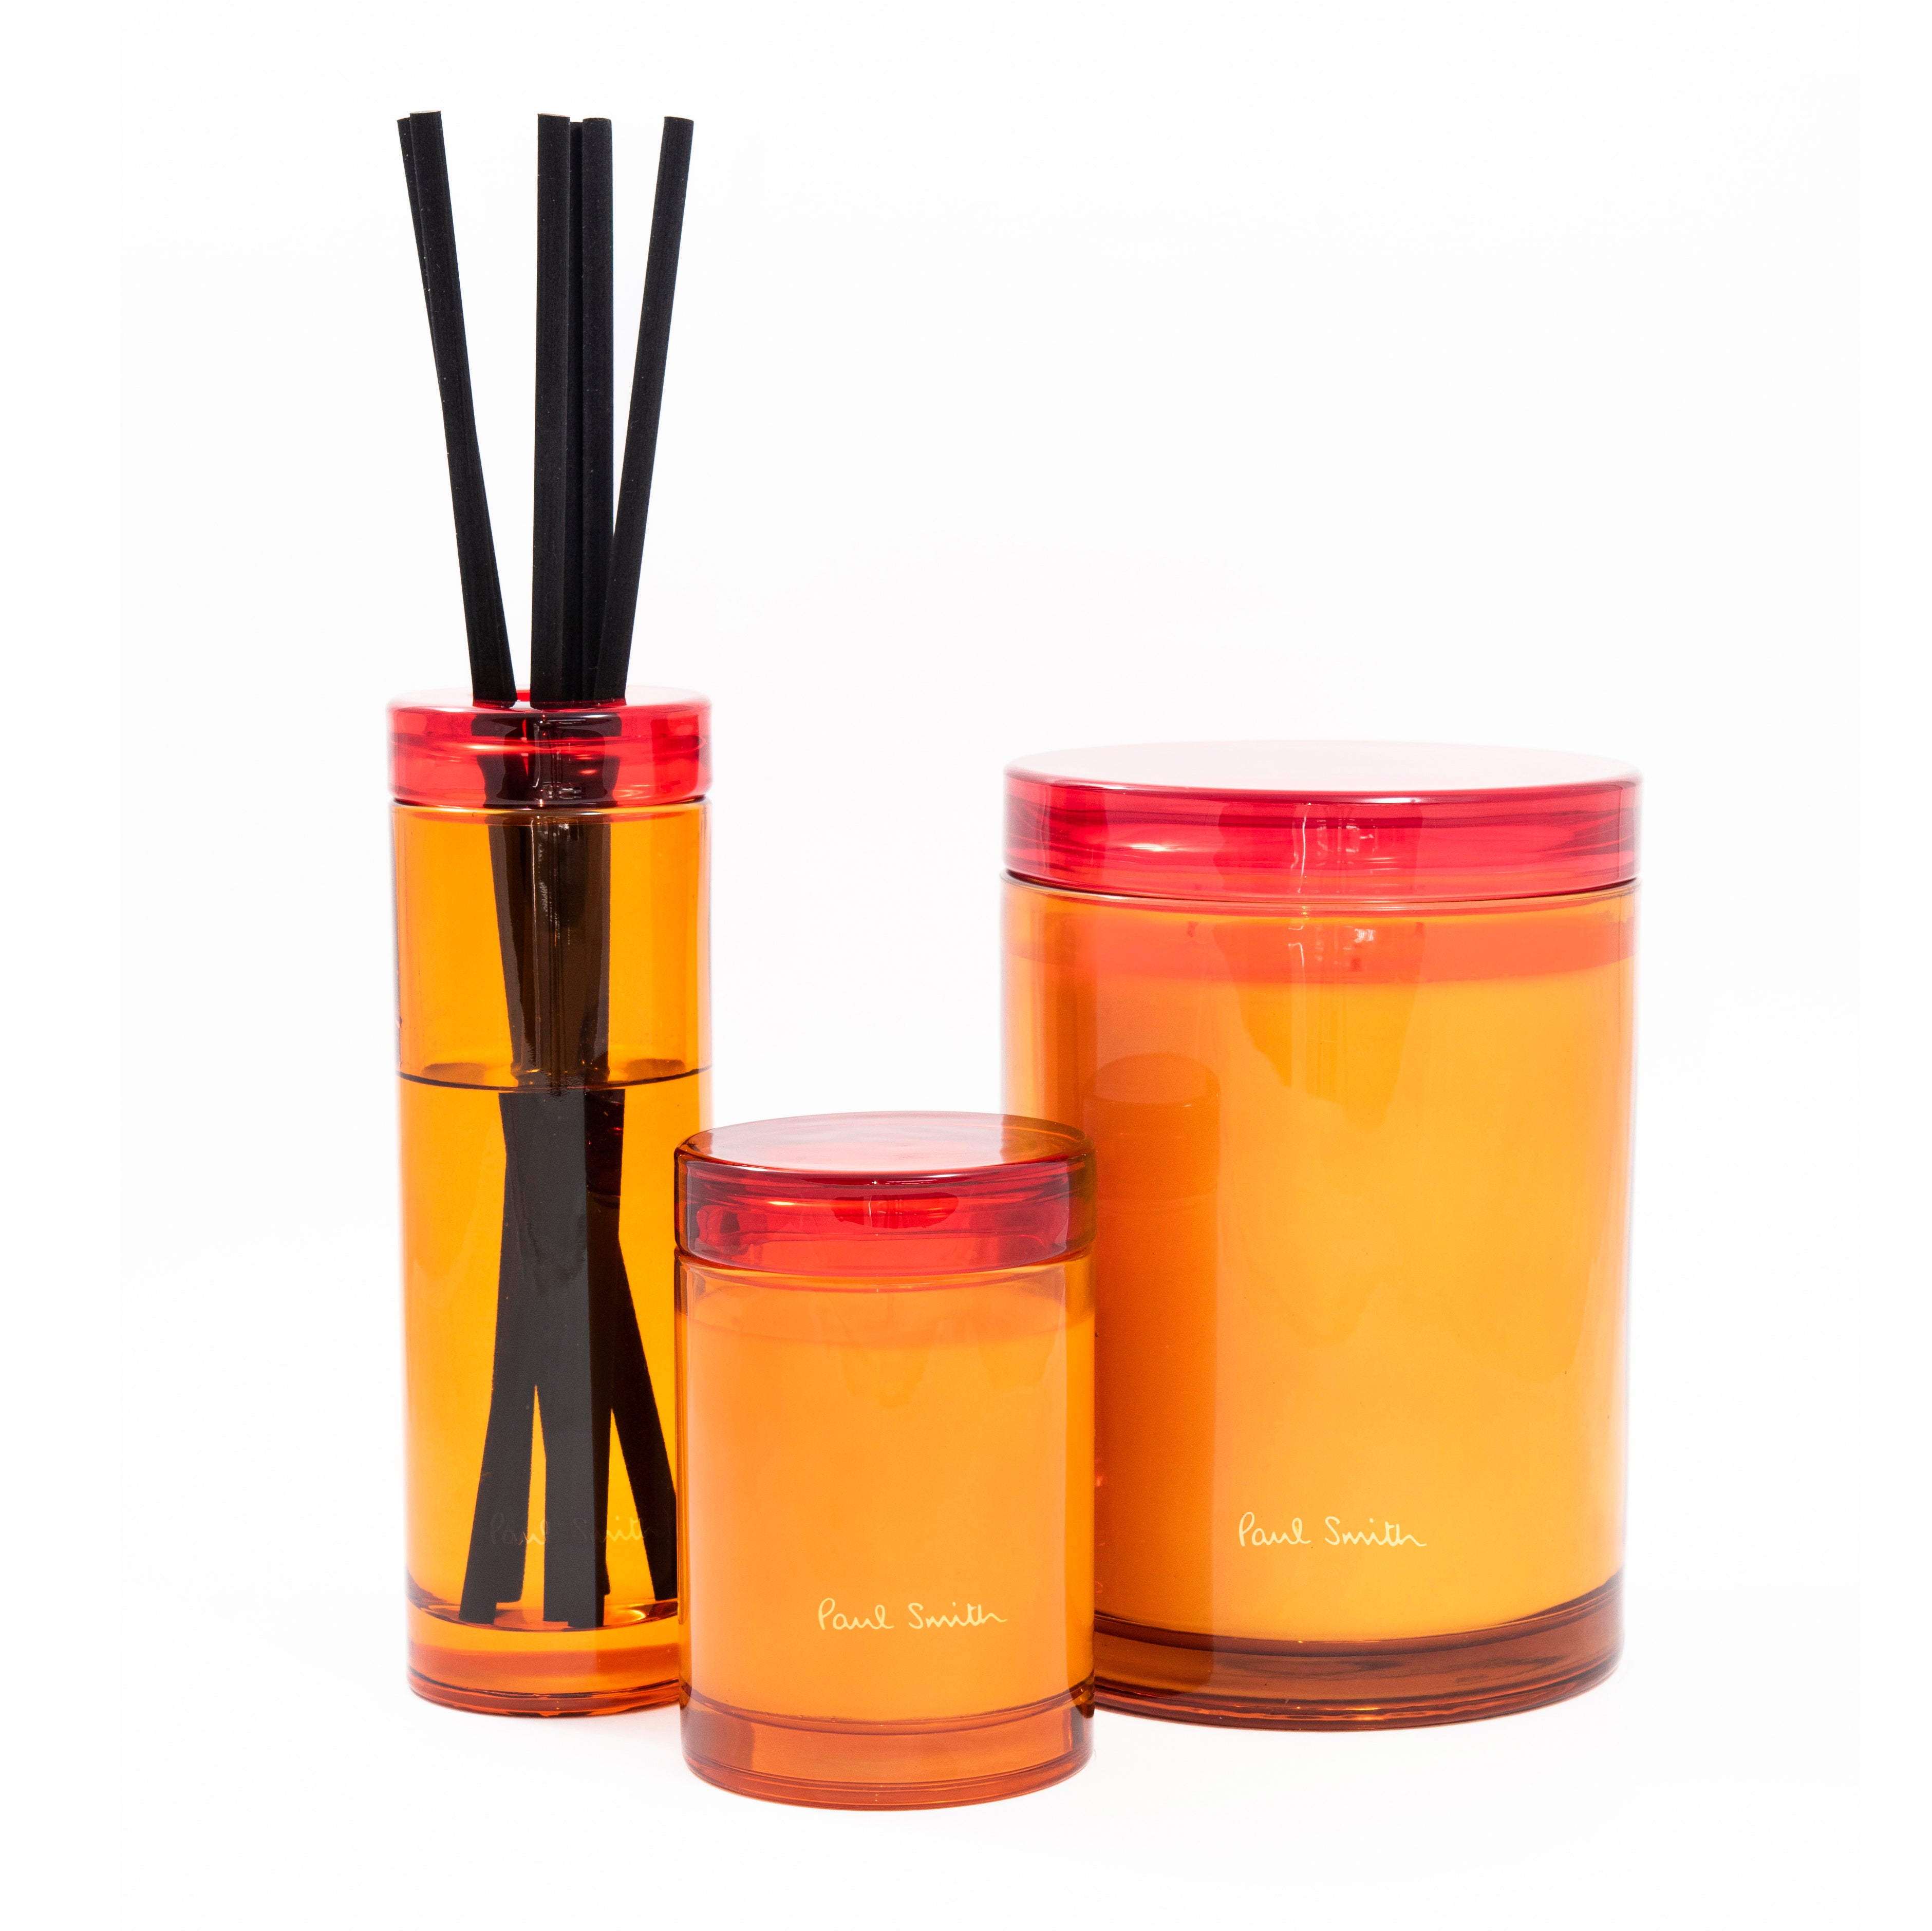 Paul Smith Bookworm Candle 1kg